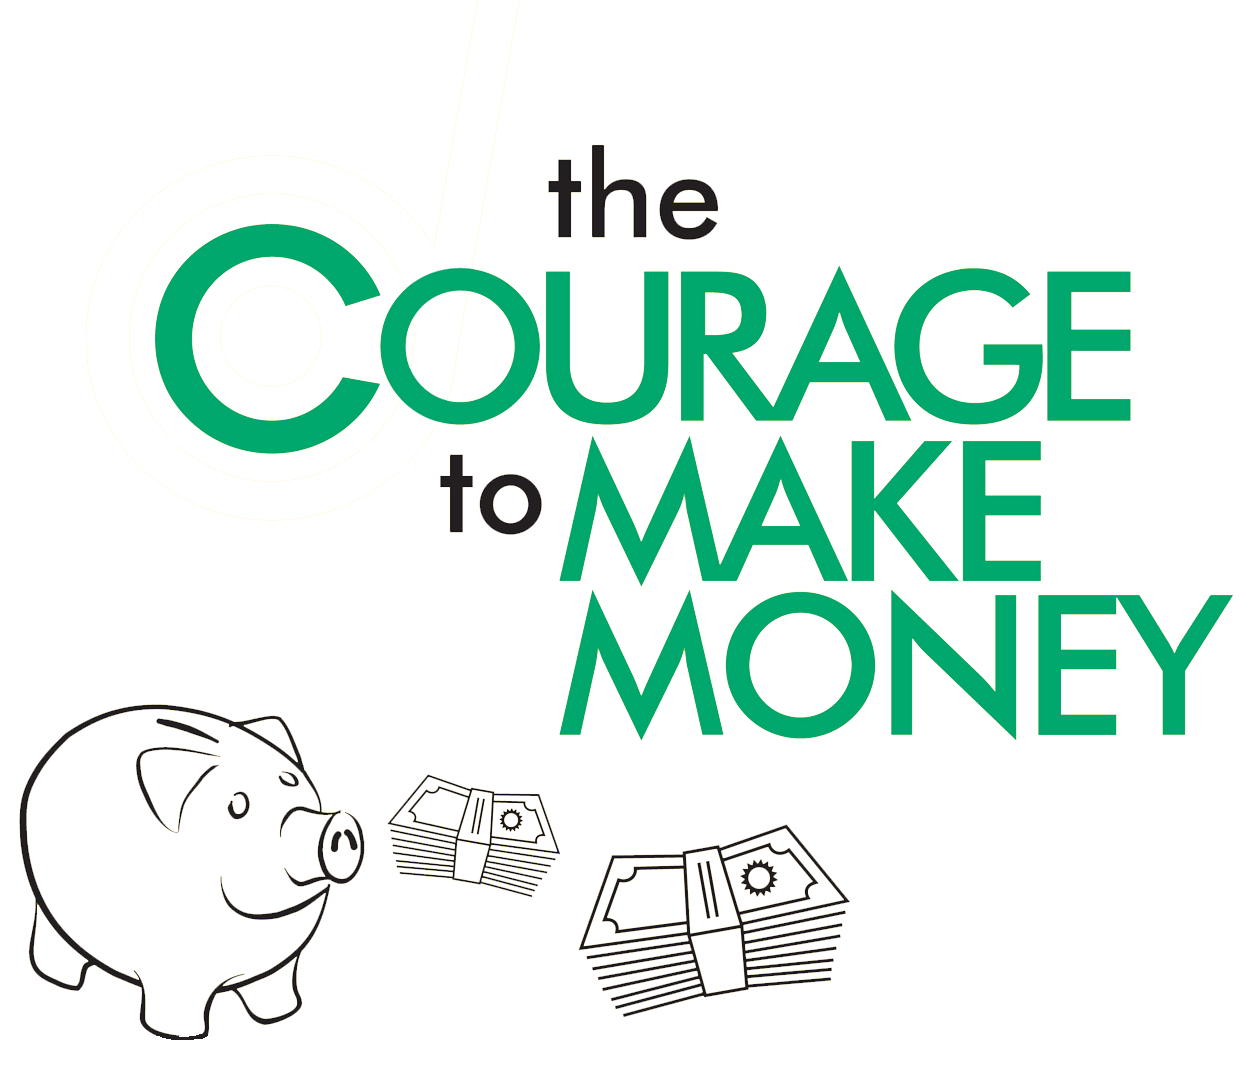 The Courage to Make Money